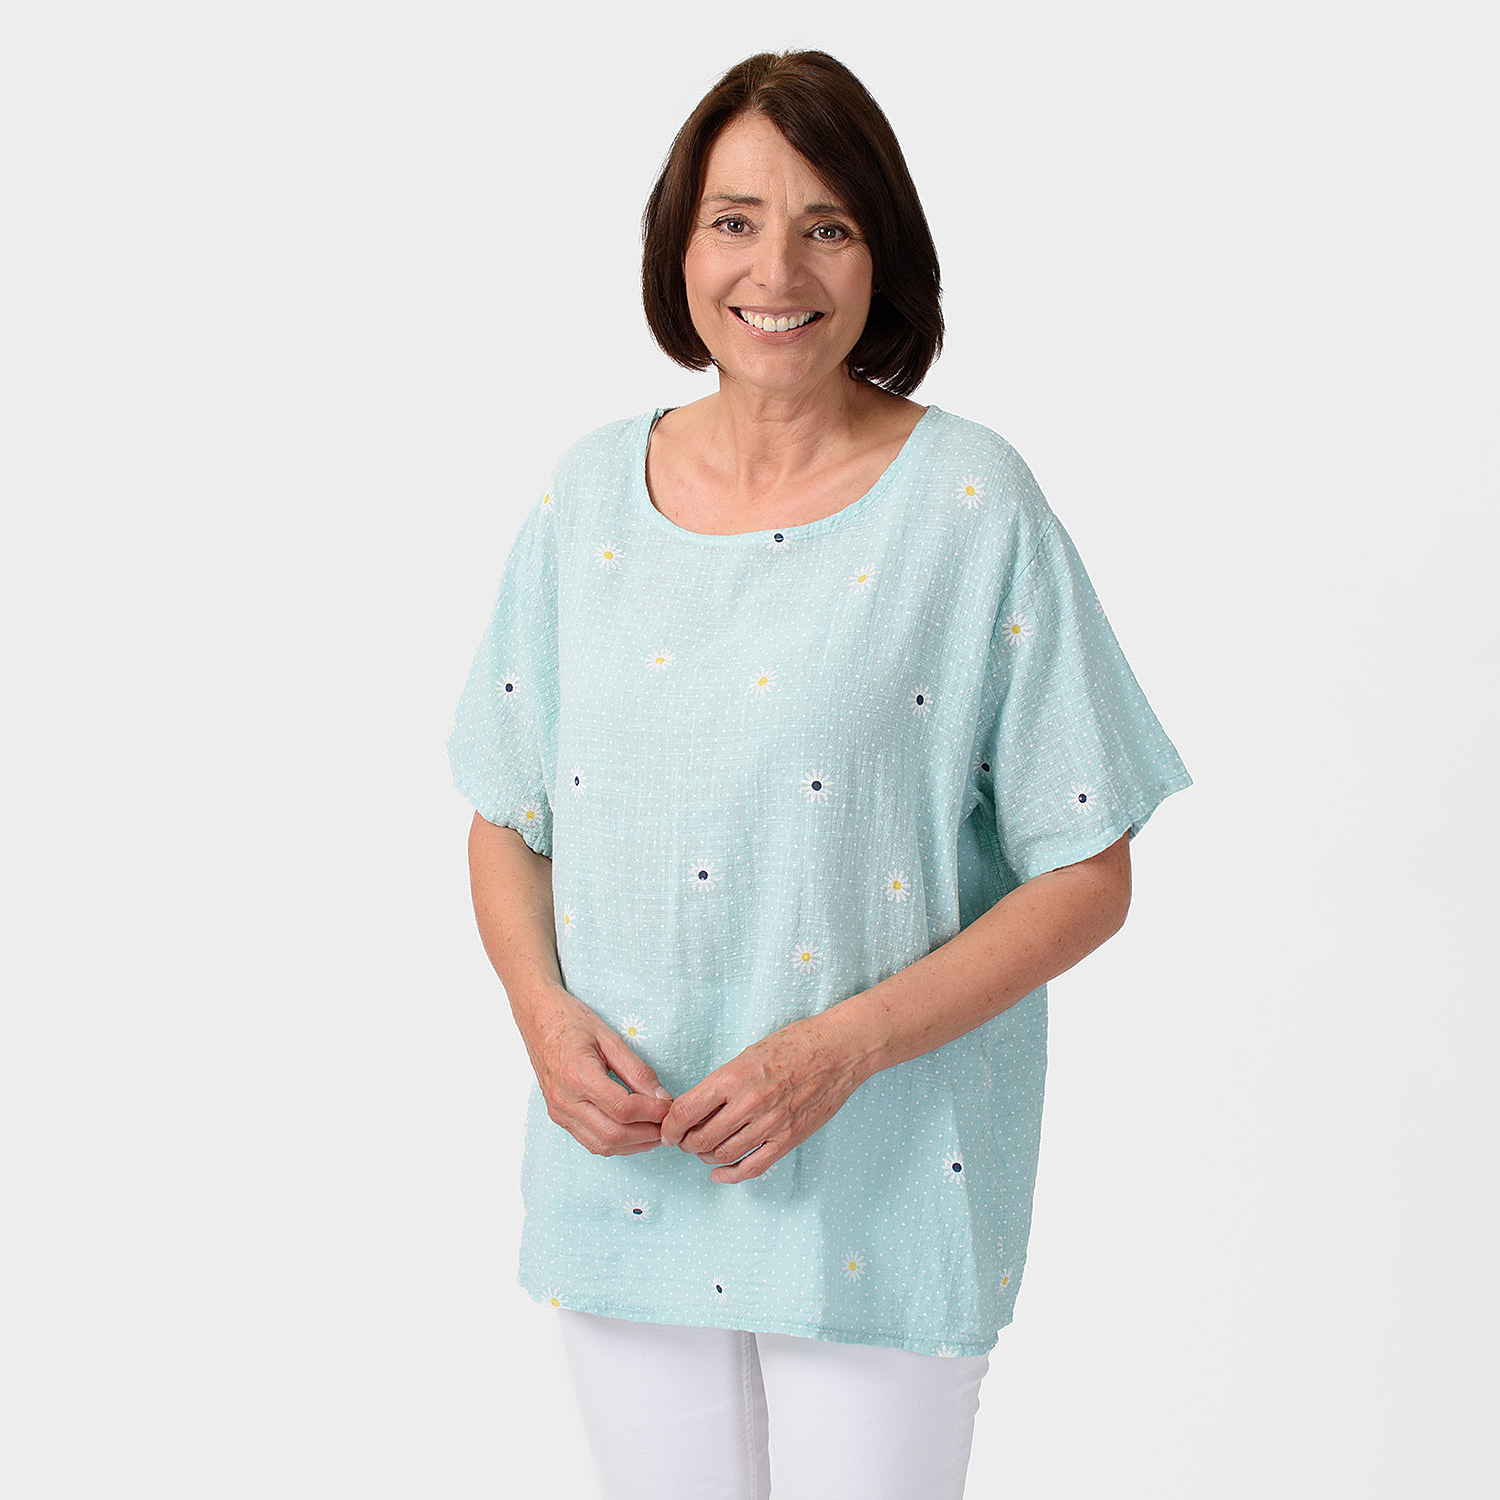 Sugar-Crisp-Daisey-Print-Top-One-Size-Turquoise